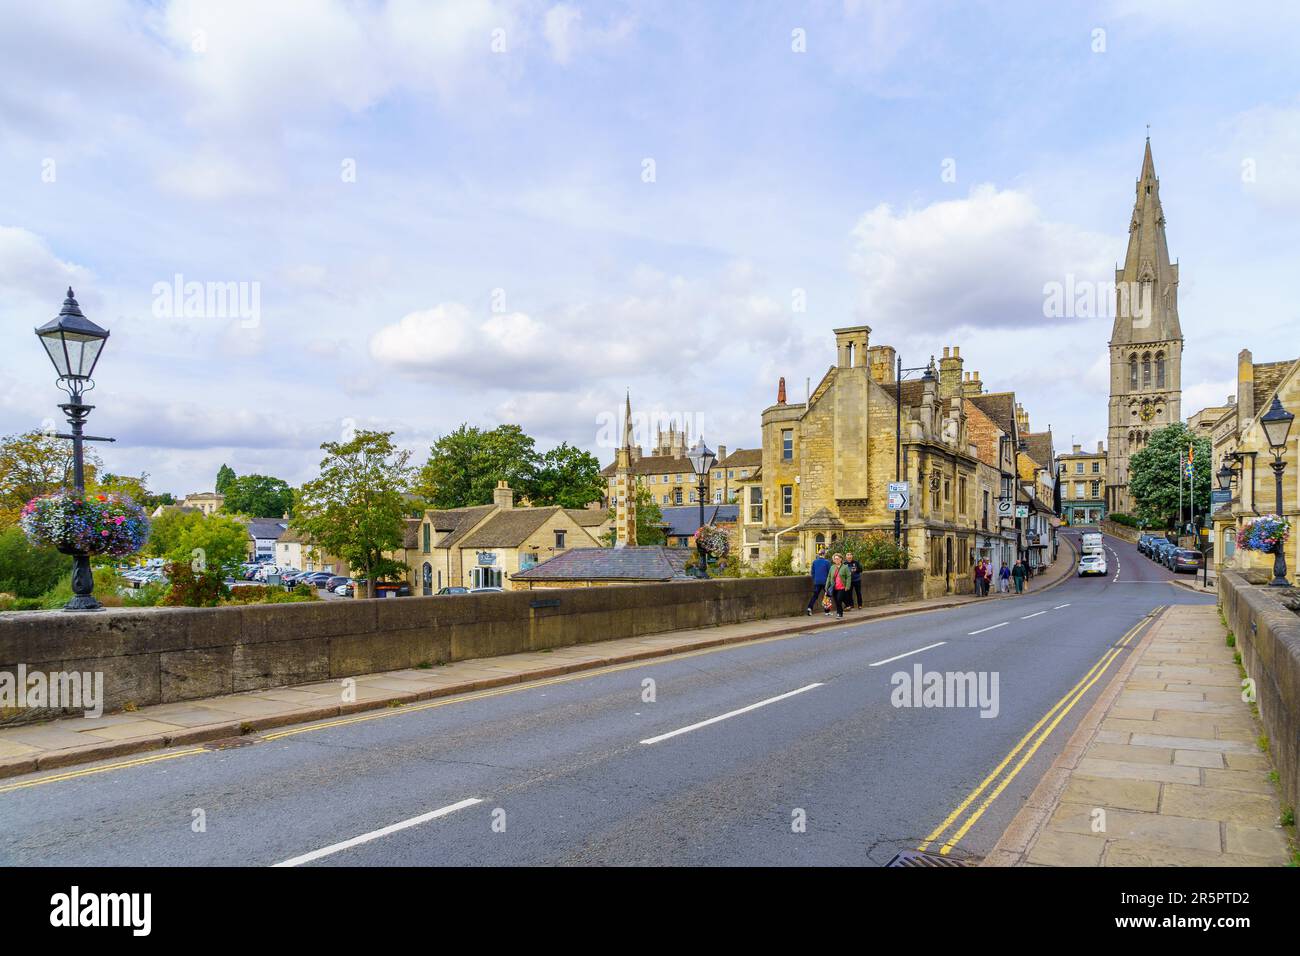 Stamford, UK - September 22, 2022: View of the Stamford bridge over the Welland River, and the Saint Mary church, with locals and visitors, in Stamfor Stock Photo